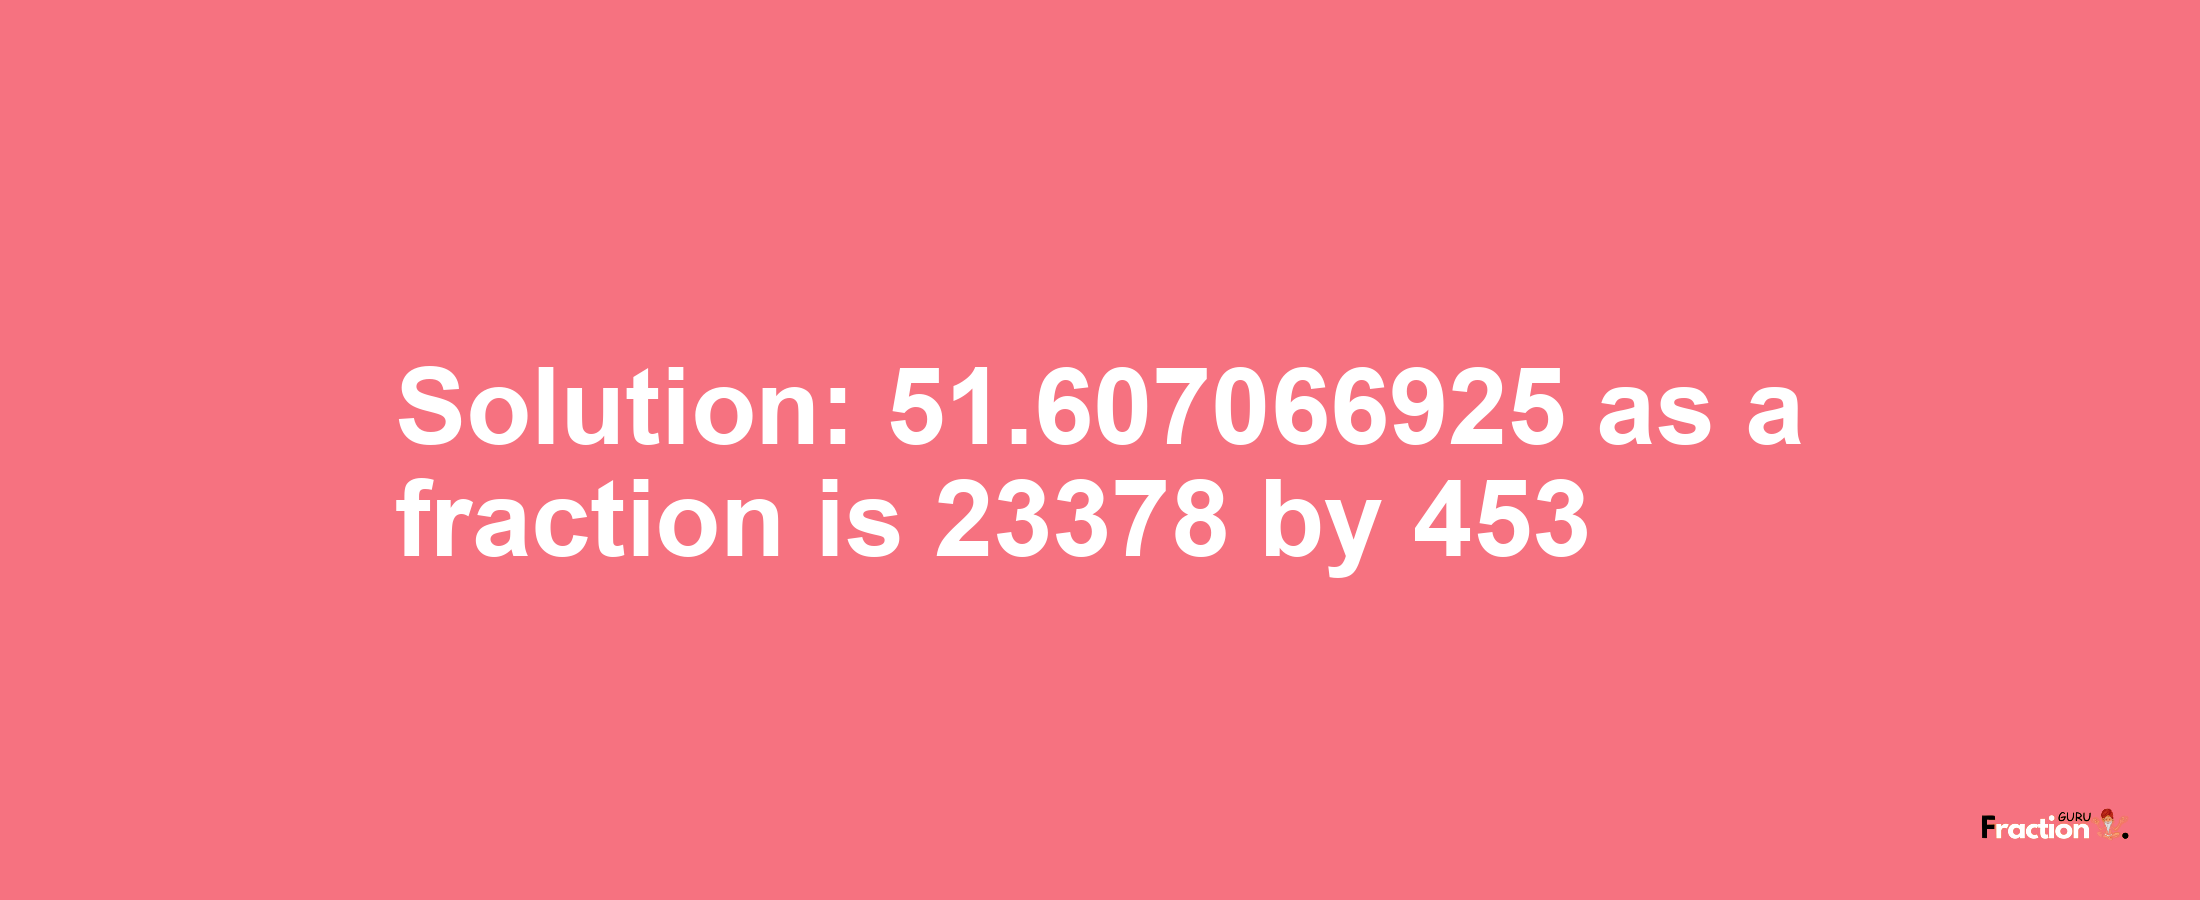 Solution:51.607066925 as a fraction is 23378/453